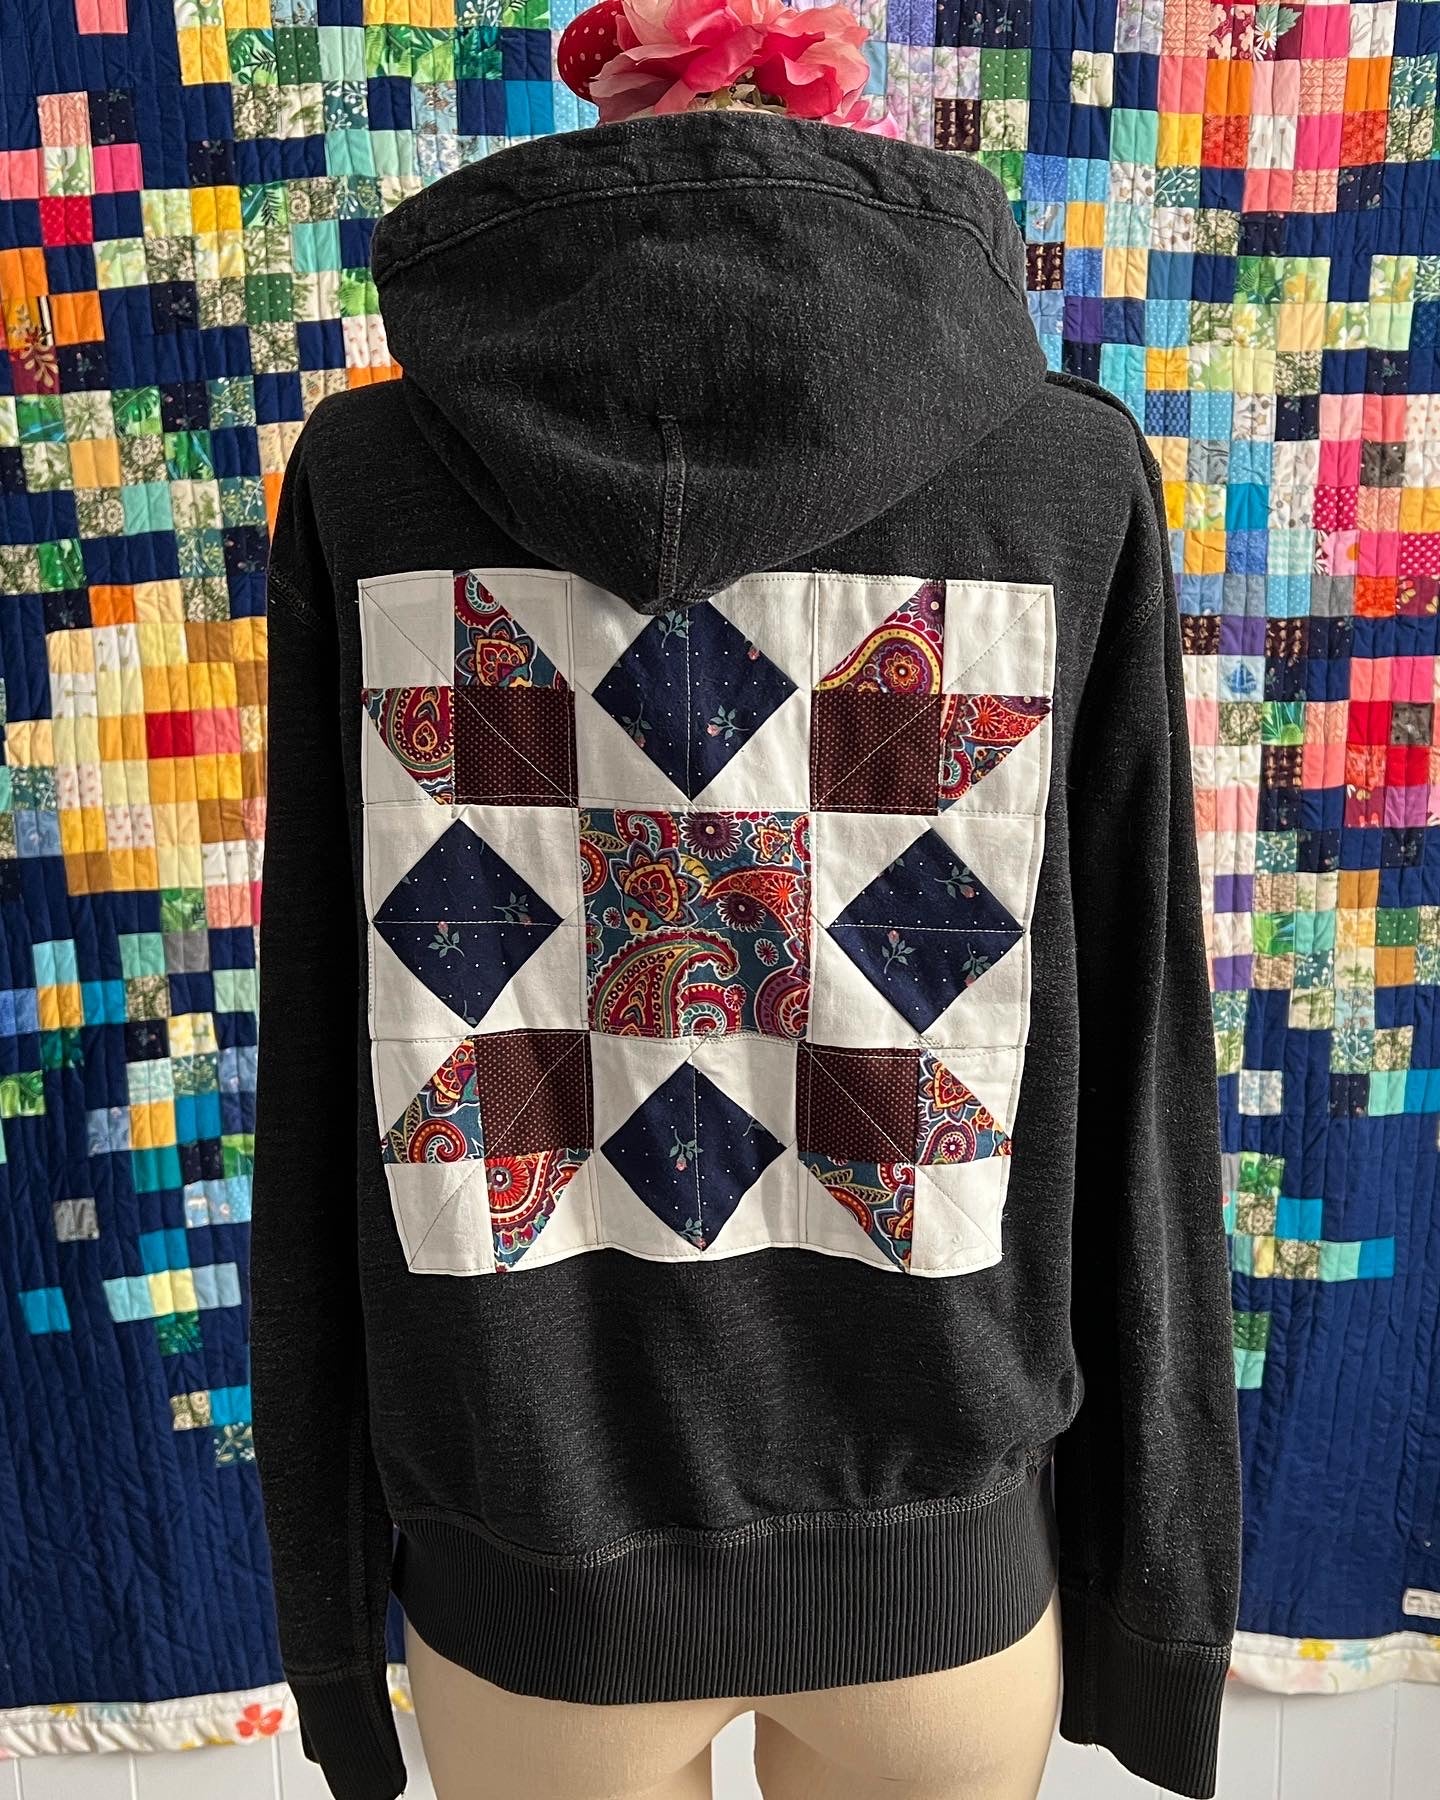 A Panic Clothing - Quilt-Block Crew - Choose Your Style!